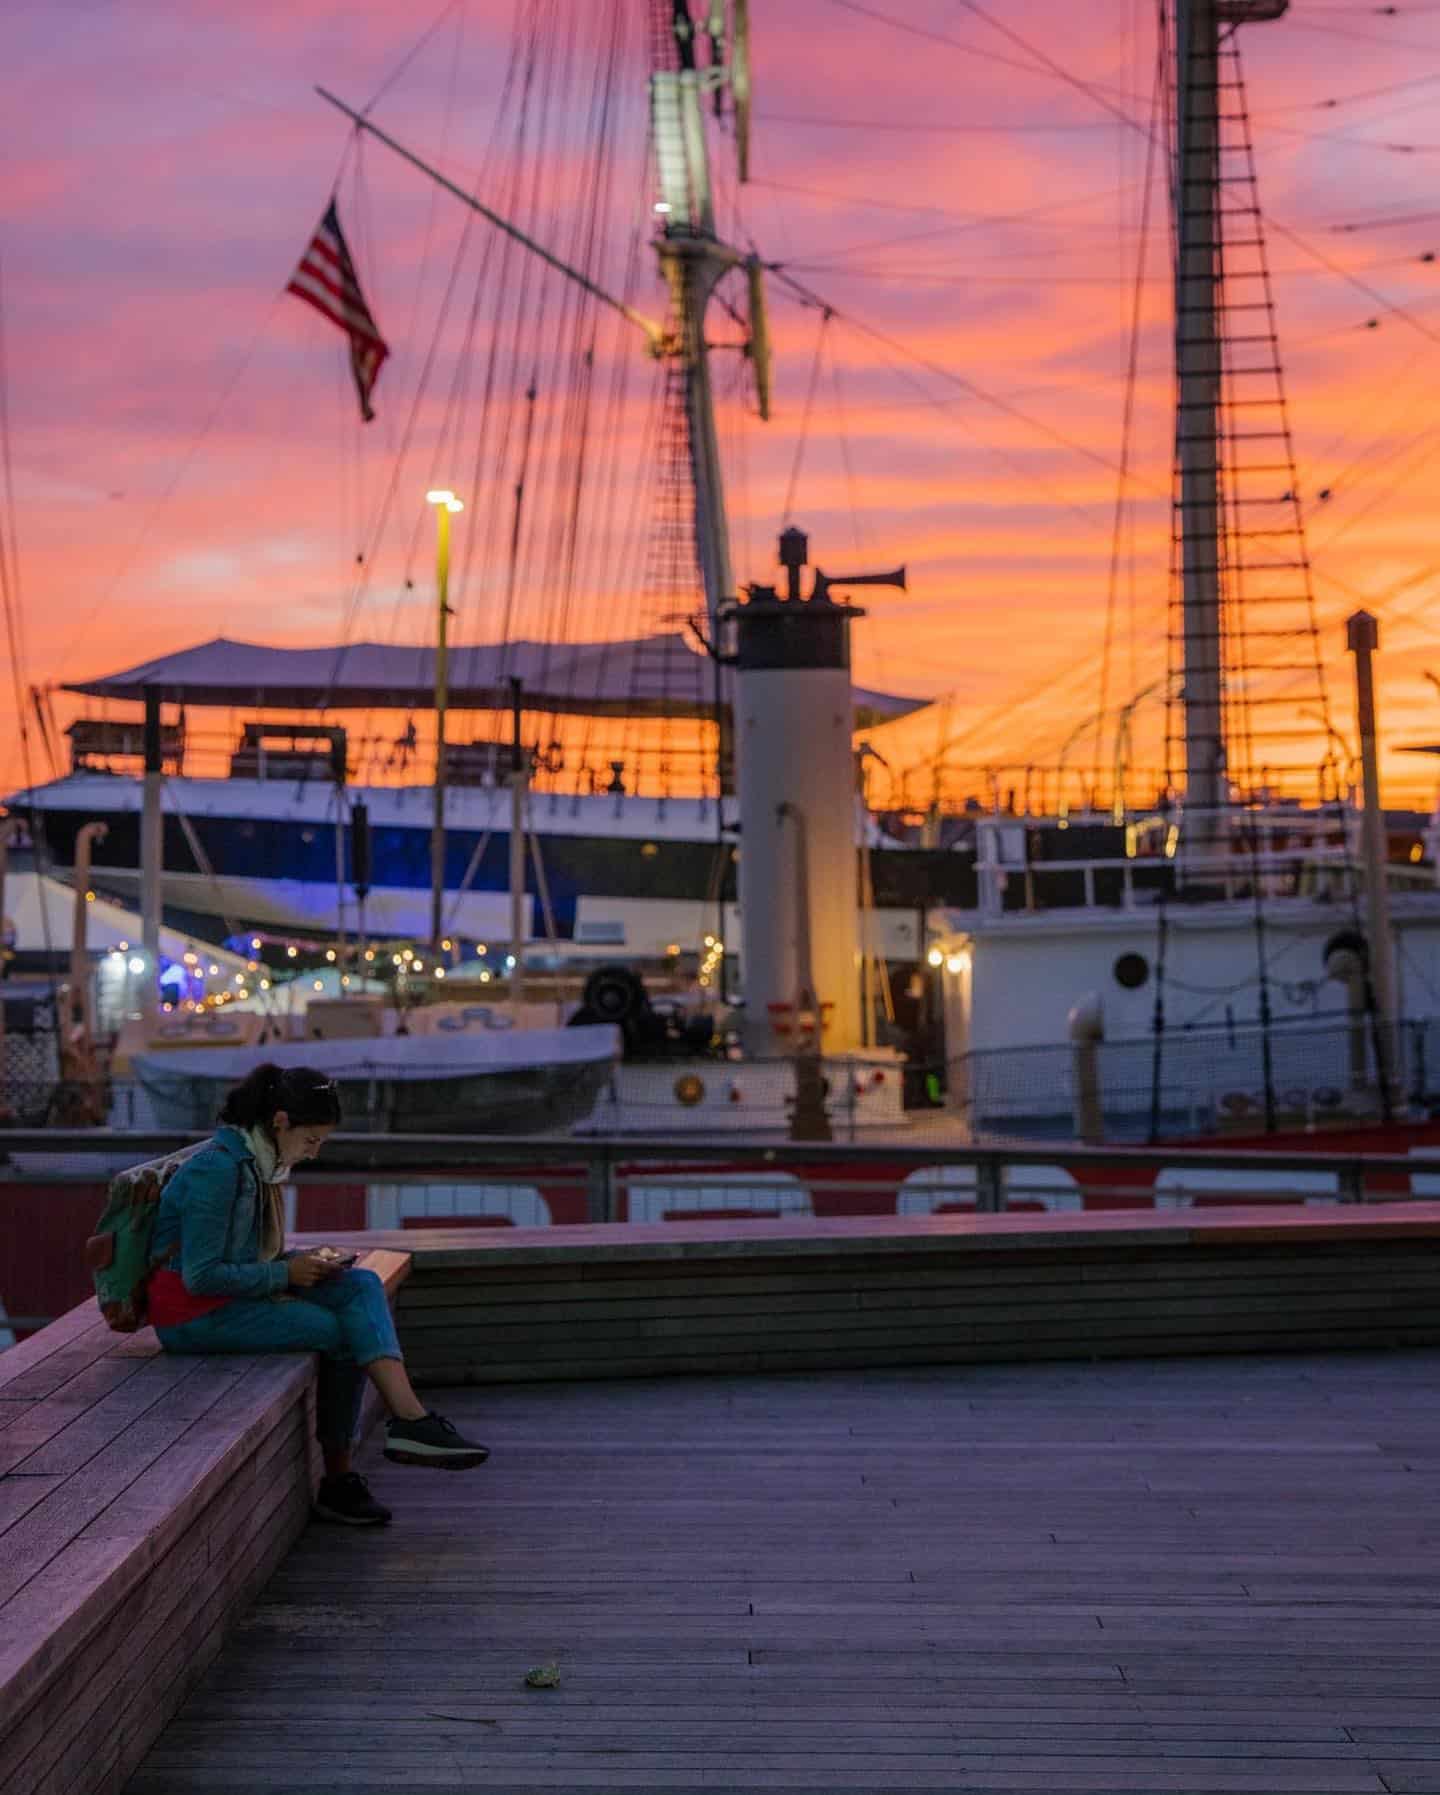 Sunsets are better downtown. Get lost. Find New York. #TheSeaport